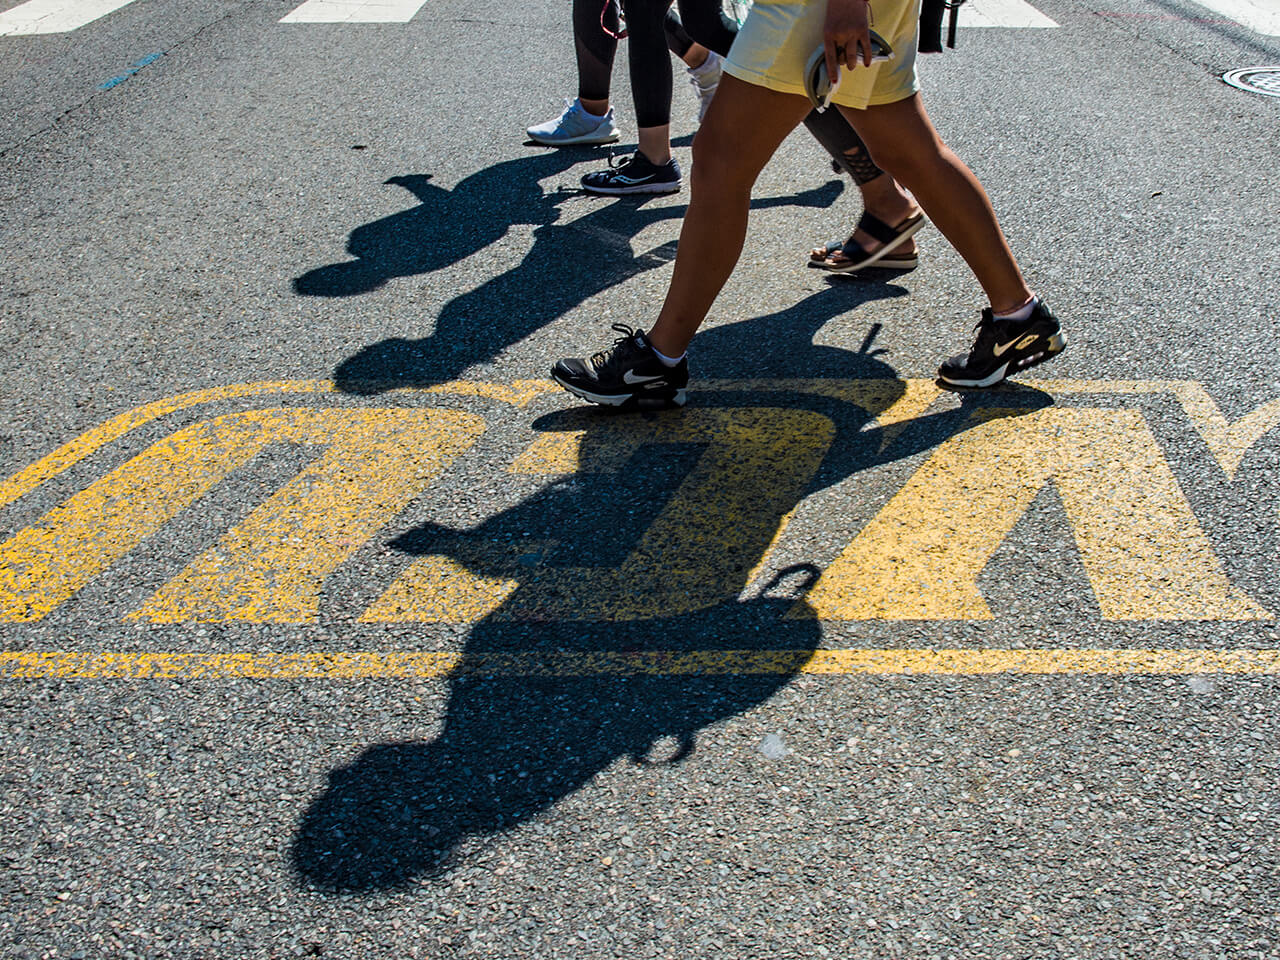 Students crossing the street with a vcu logo on the pavement